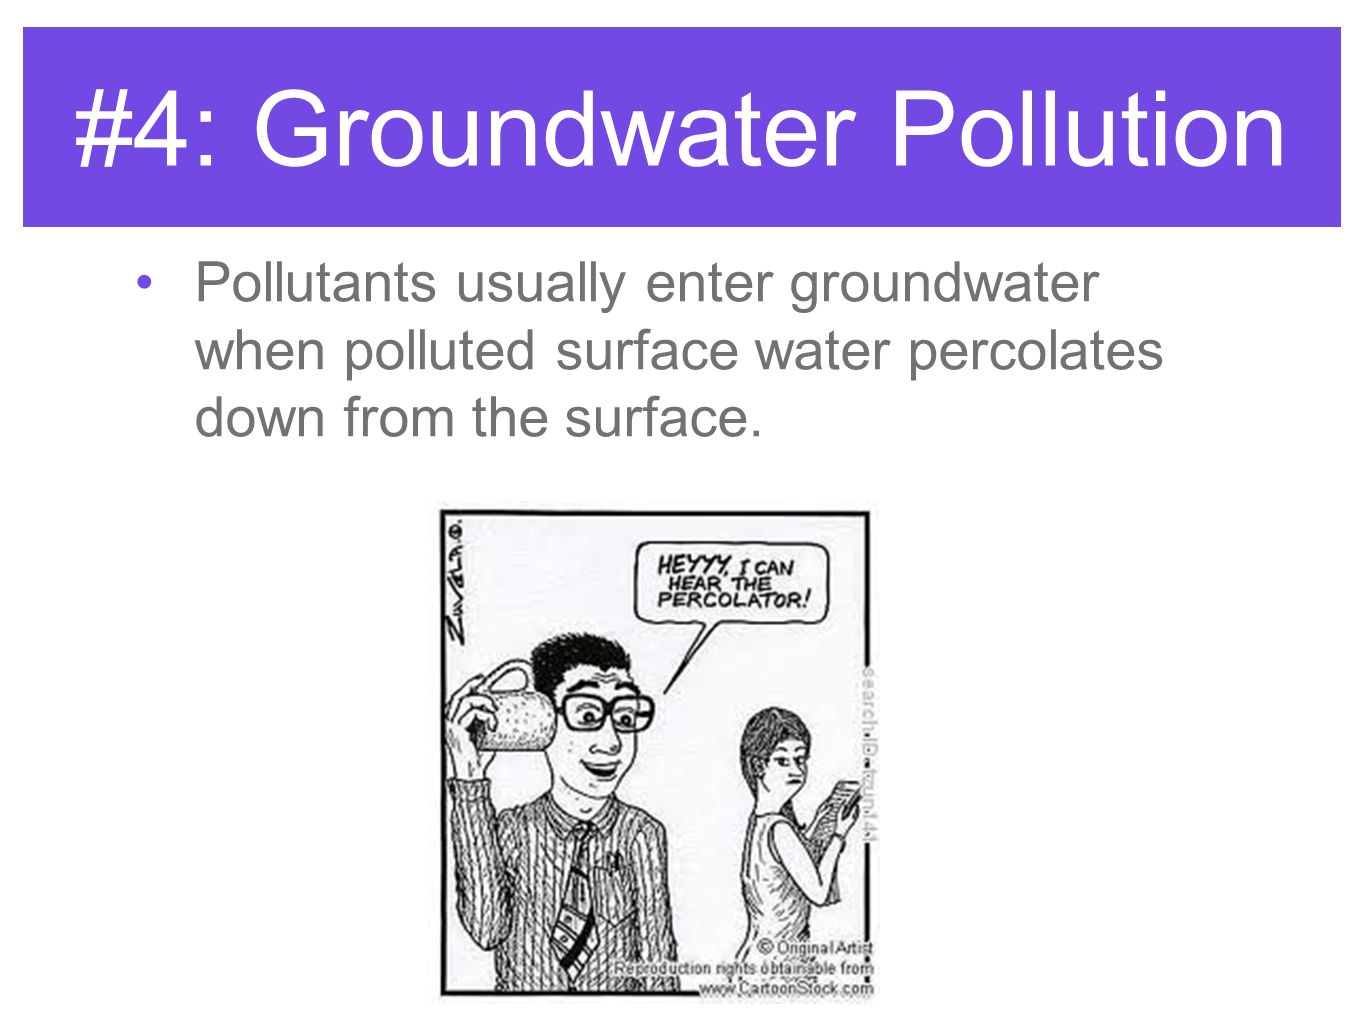 #4: Groundwater Pollution